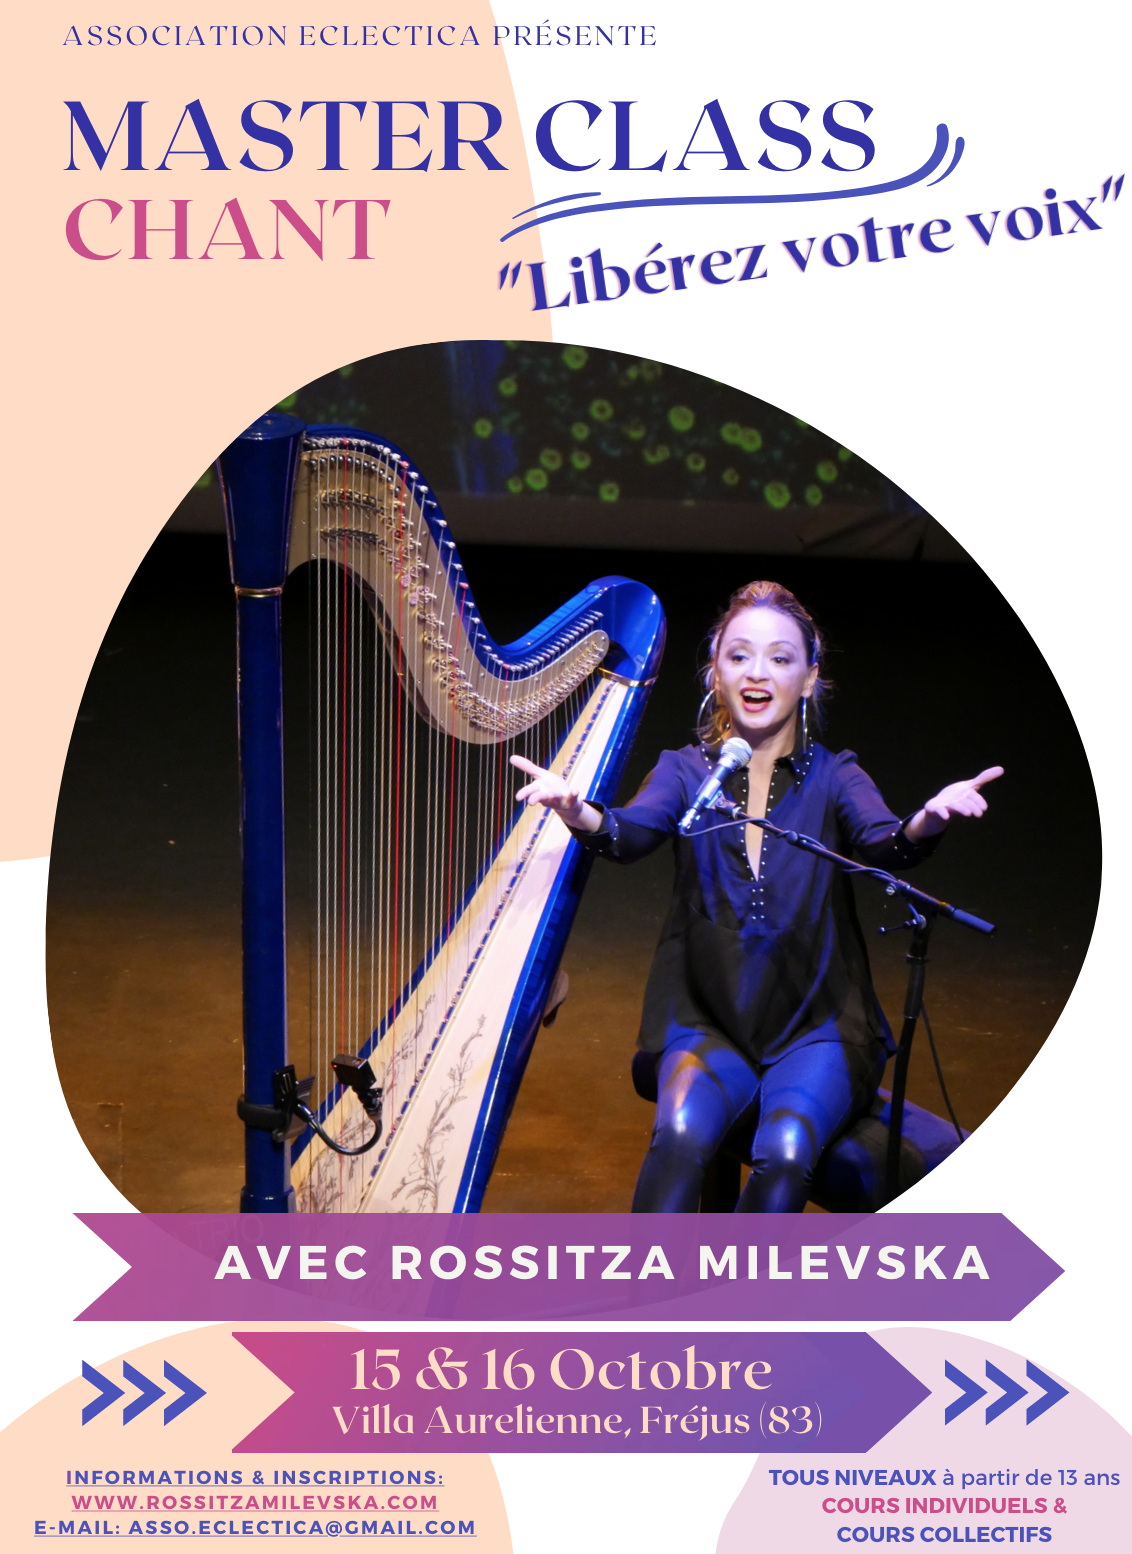 sing with Rossi, chanter librement, masterclass de chant